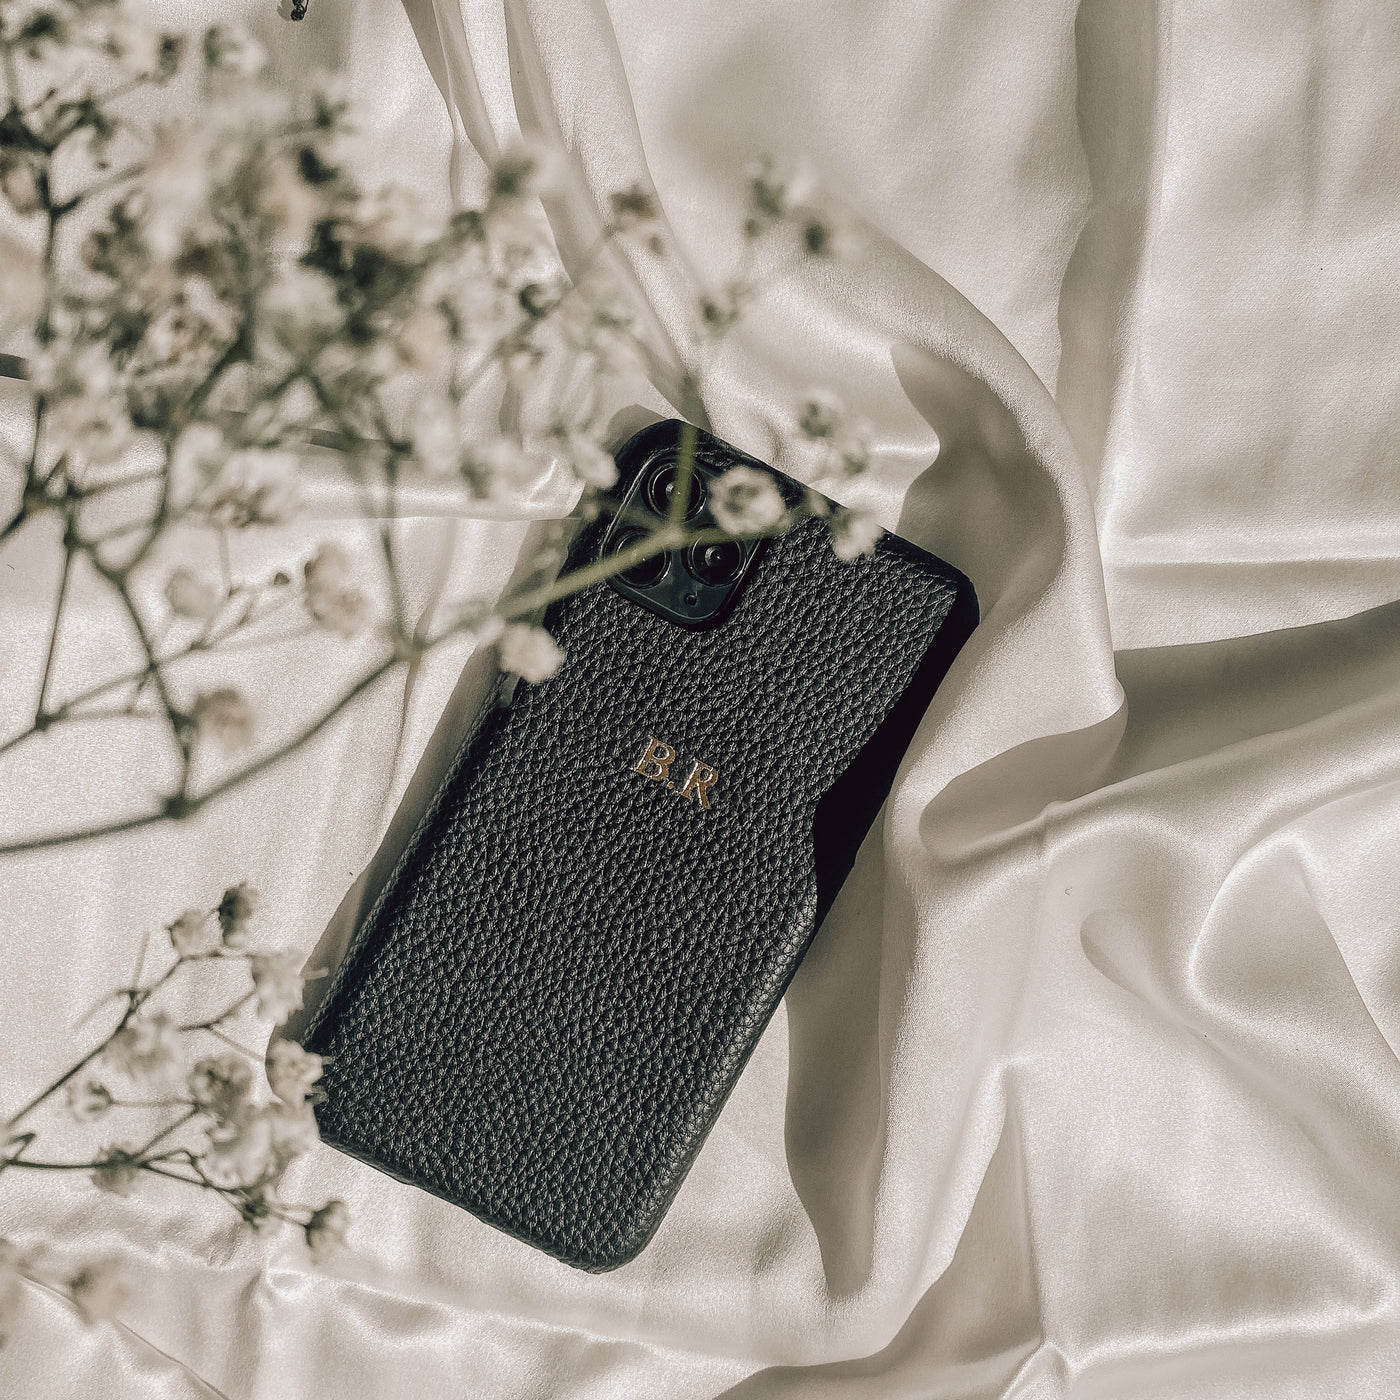 Black pebble leather phone case with embossed initials 